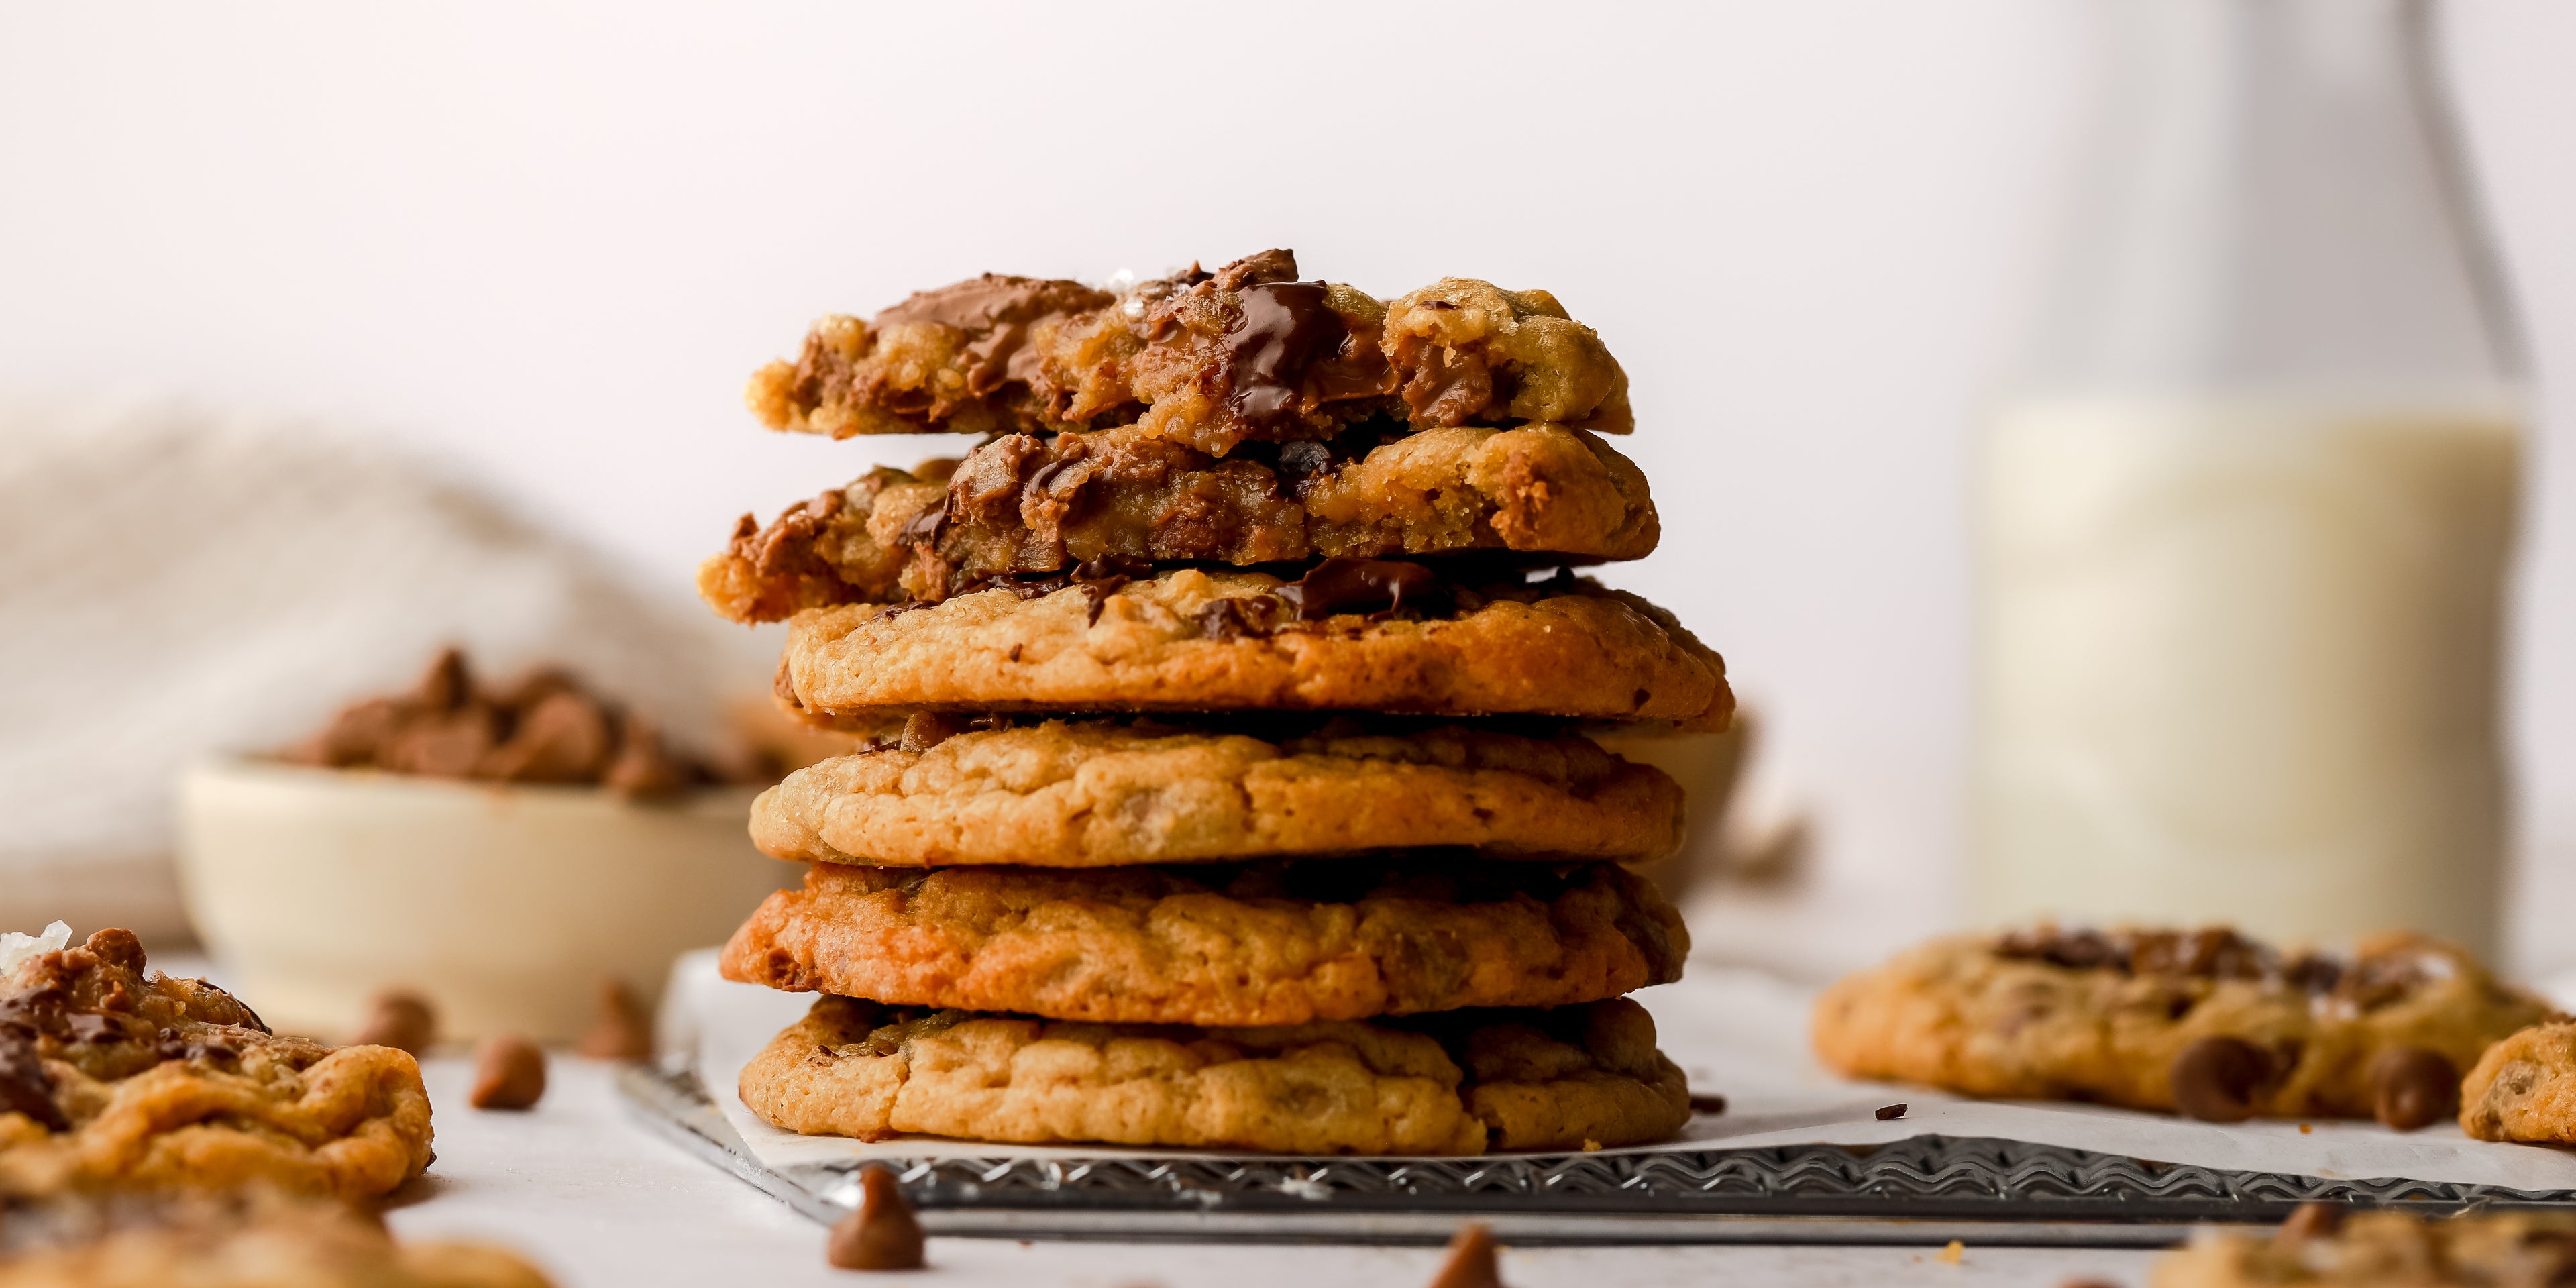 Stack of homemade Millie’s cookies on a baking tray